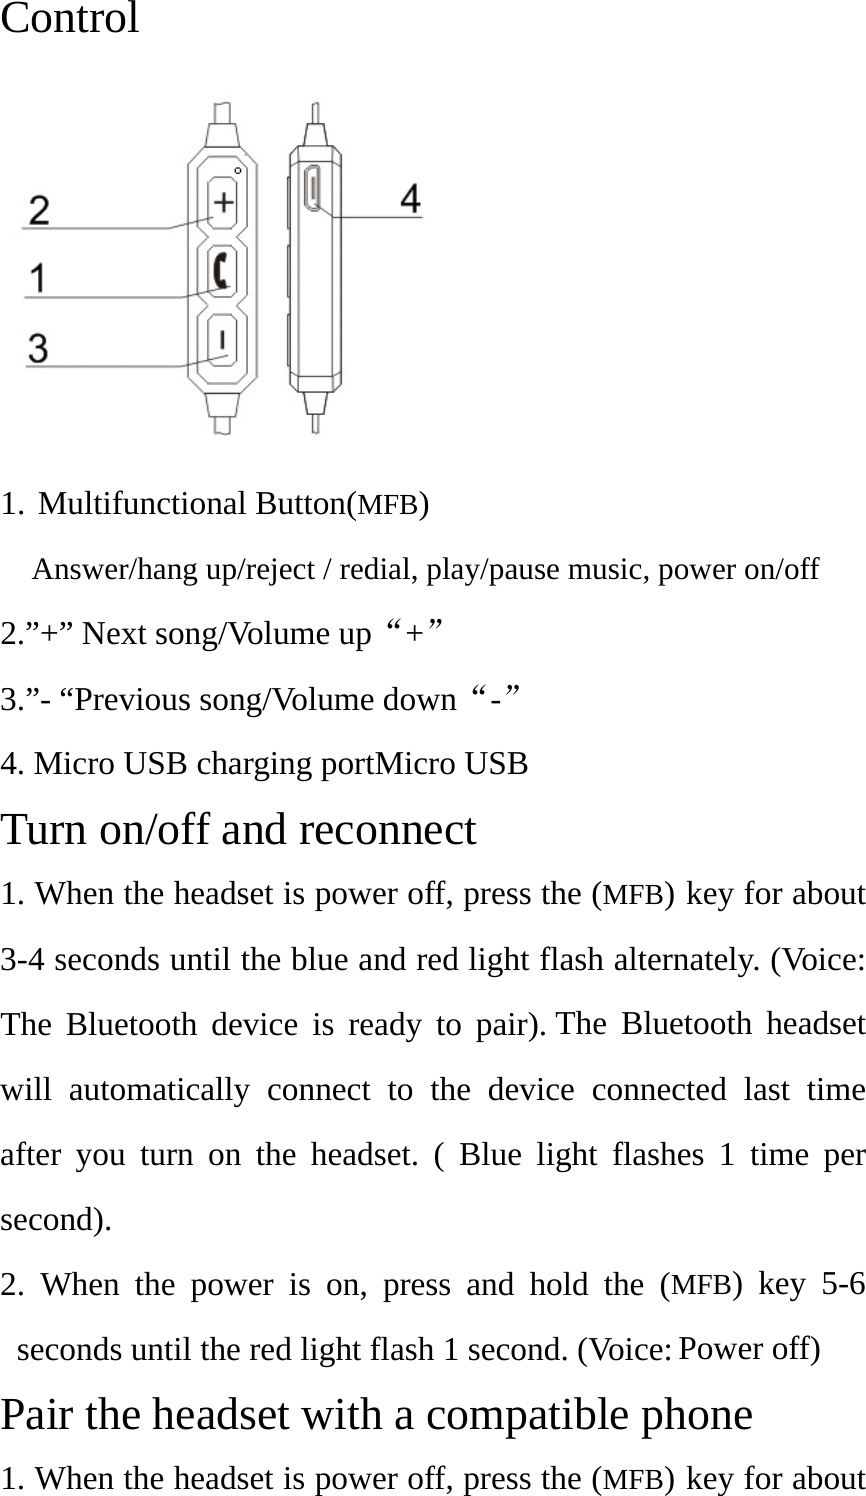 Control 1. Multifunctional Button(MFB)Answer/hang up/reject / redial, play/pause music, power on/off2.”+” Next song/Volume up“+” 3.”- “Previous song/Volume down“-” 4. Micro USB charging portMicro USBTurn on/off and reconnect 1. When the headset is power off, press the (MFB) key for about3-4 seconds until the blue and red light flash alternately. (Voice:The Bluetooth device is ready to pair). The Bluetooth headsetwill automatically connect to the device connected last timeafter you turn on the headset. ( Blue light flashes 1 time persecond).2. When the power is on, press and hold the (MFB) key 5-6seconds until the red light flash 1 second. (Voice: Power off)Pair the headset with a compatible phone 1. When the headset is power off, press the (MFB) key for about